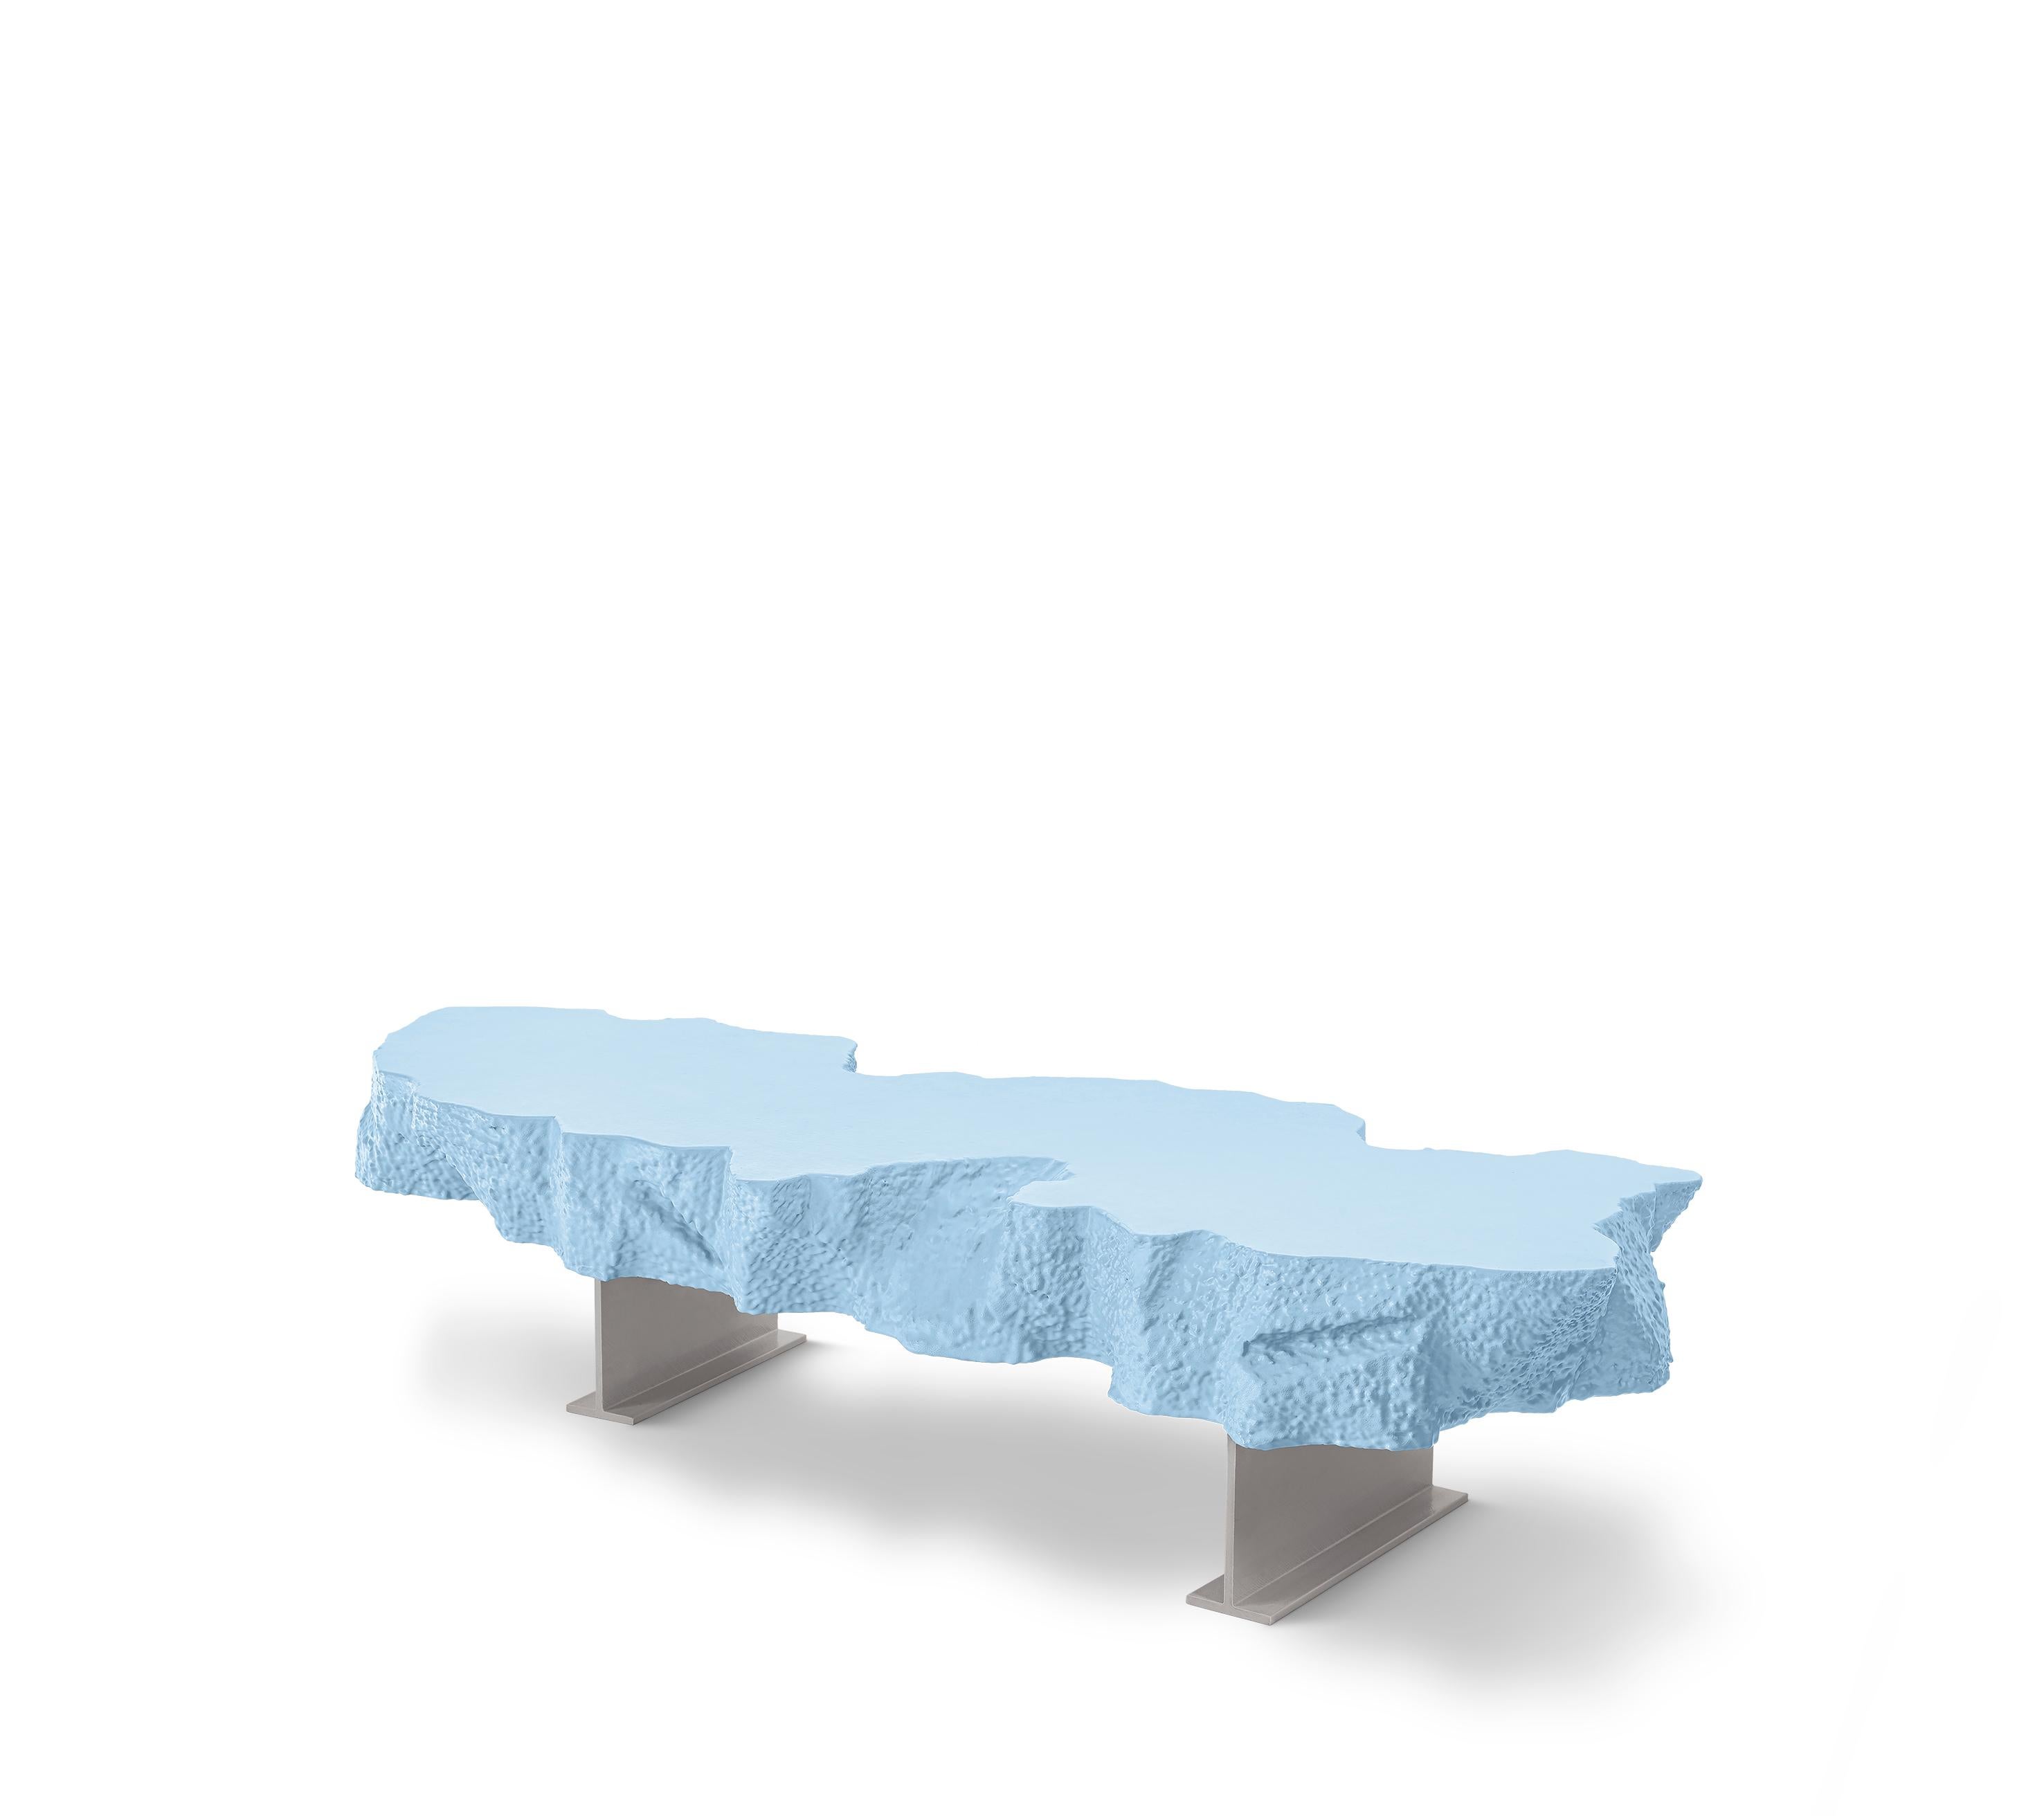 The Broken Bench, an irregular slab of “soft concrete” in polyurethane, seems to be the part missing from the large Broken Mirror, and just like the other pieces of the collection plays with the “short-circuit” between the actual softness of the